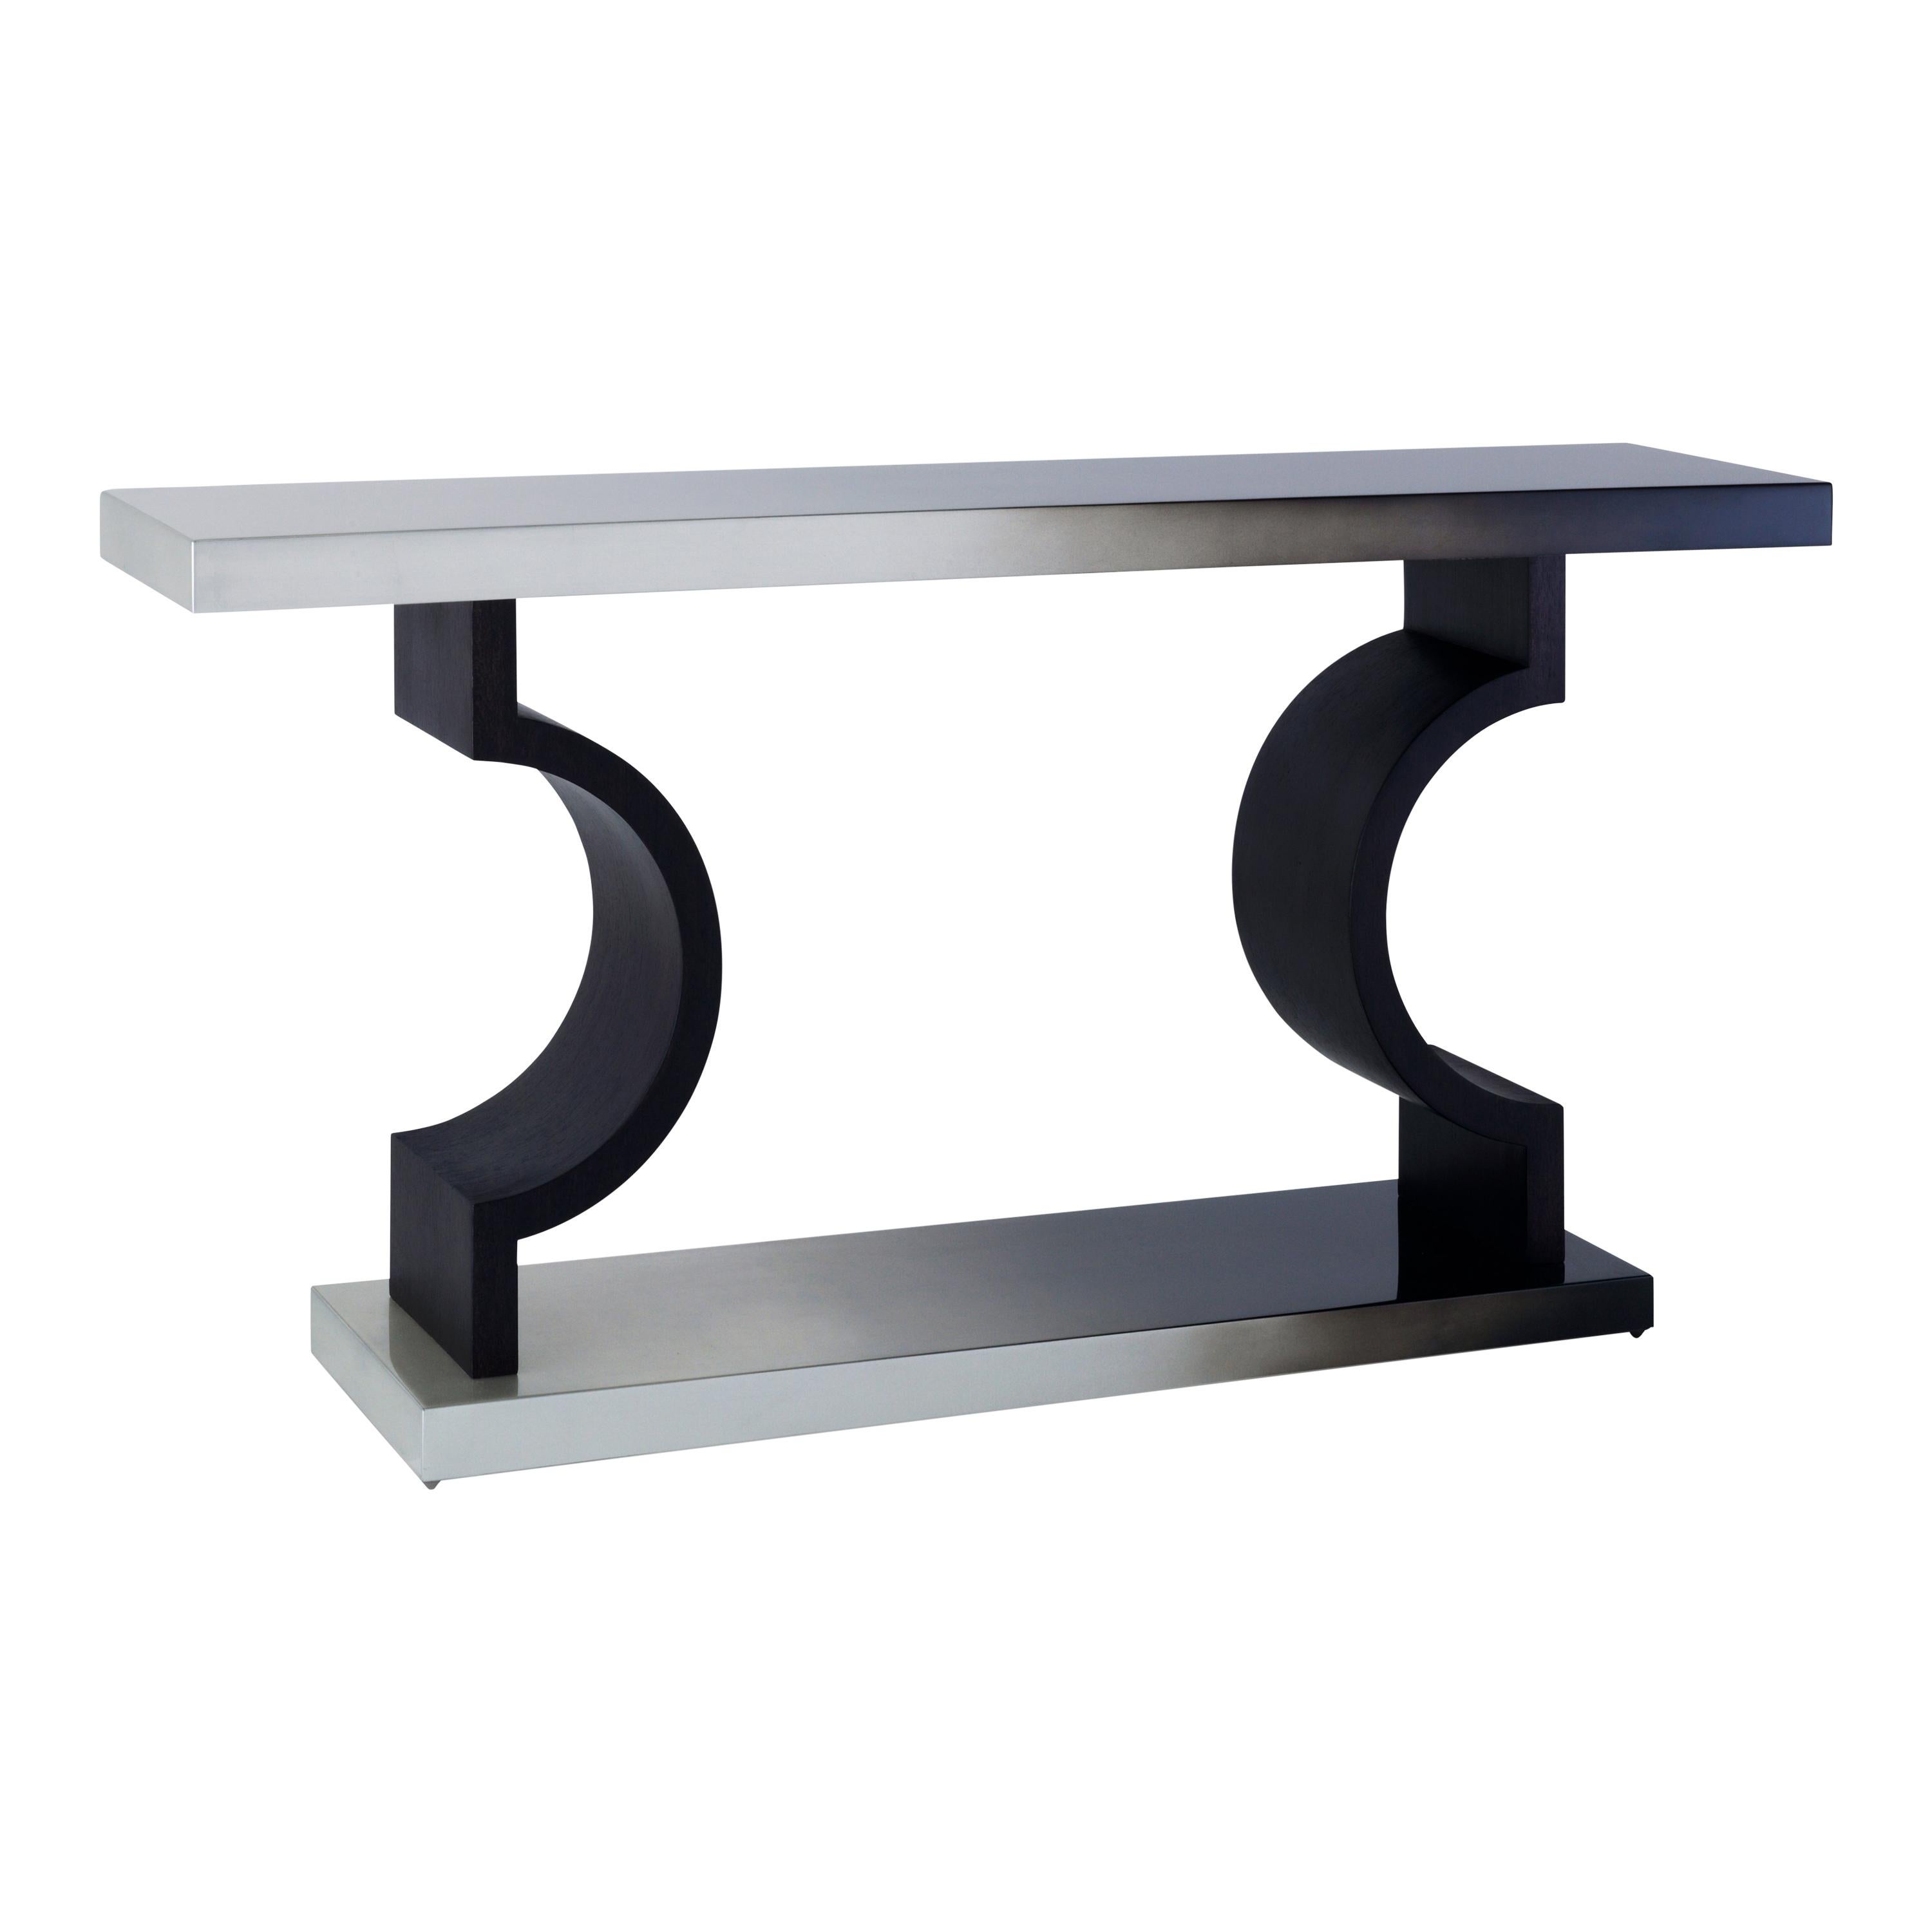 Horizon Console -  Tall Slimline Console with Ombré Leaf Finish im Angebot